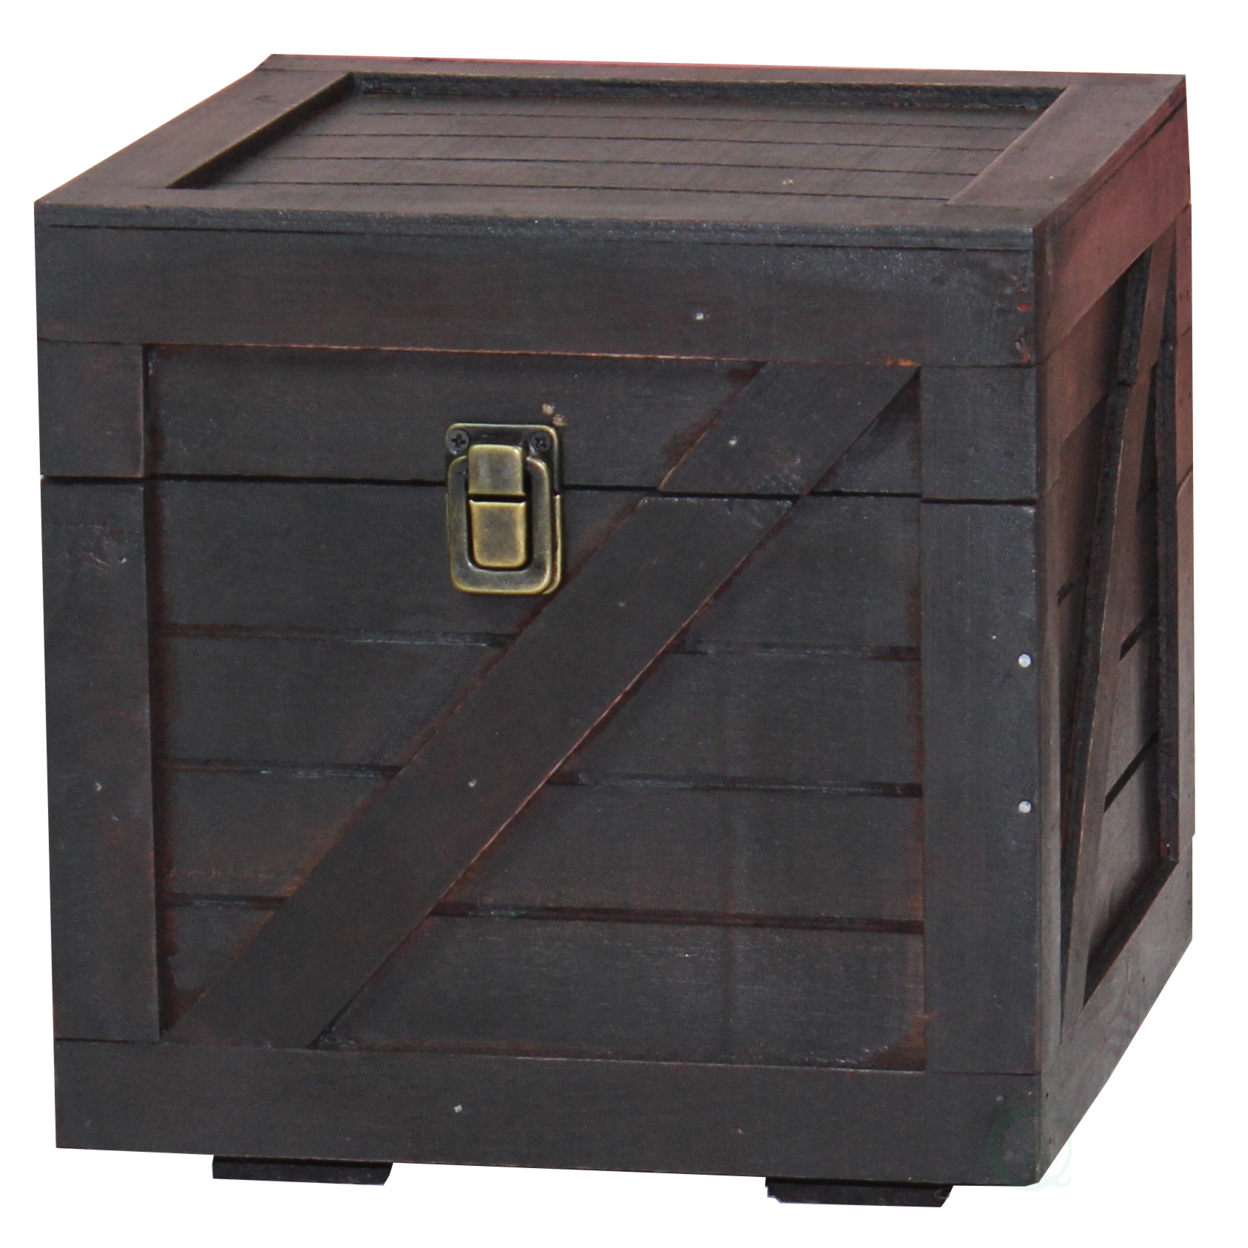 Stackable Wooden Cargo Crate Style Storage Chest - Black